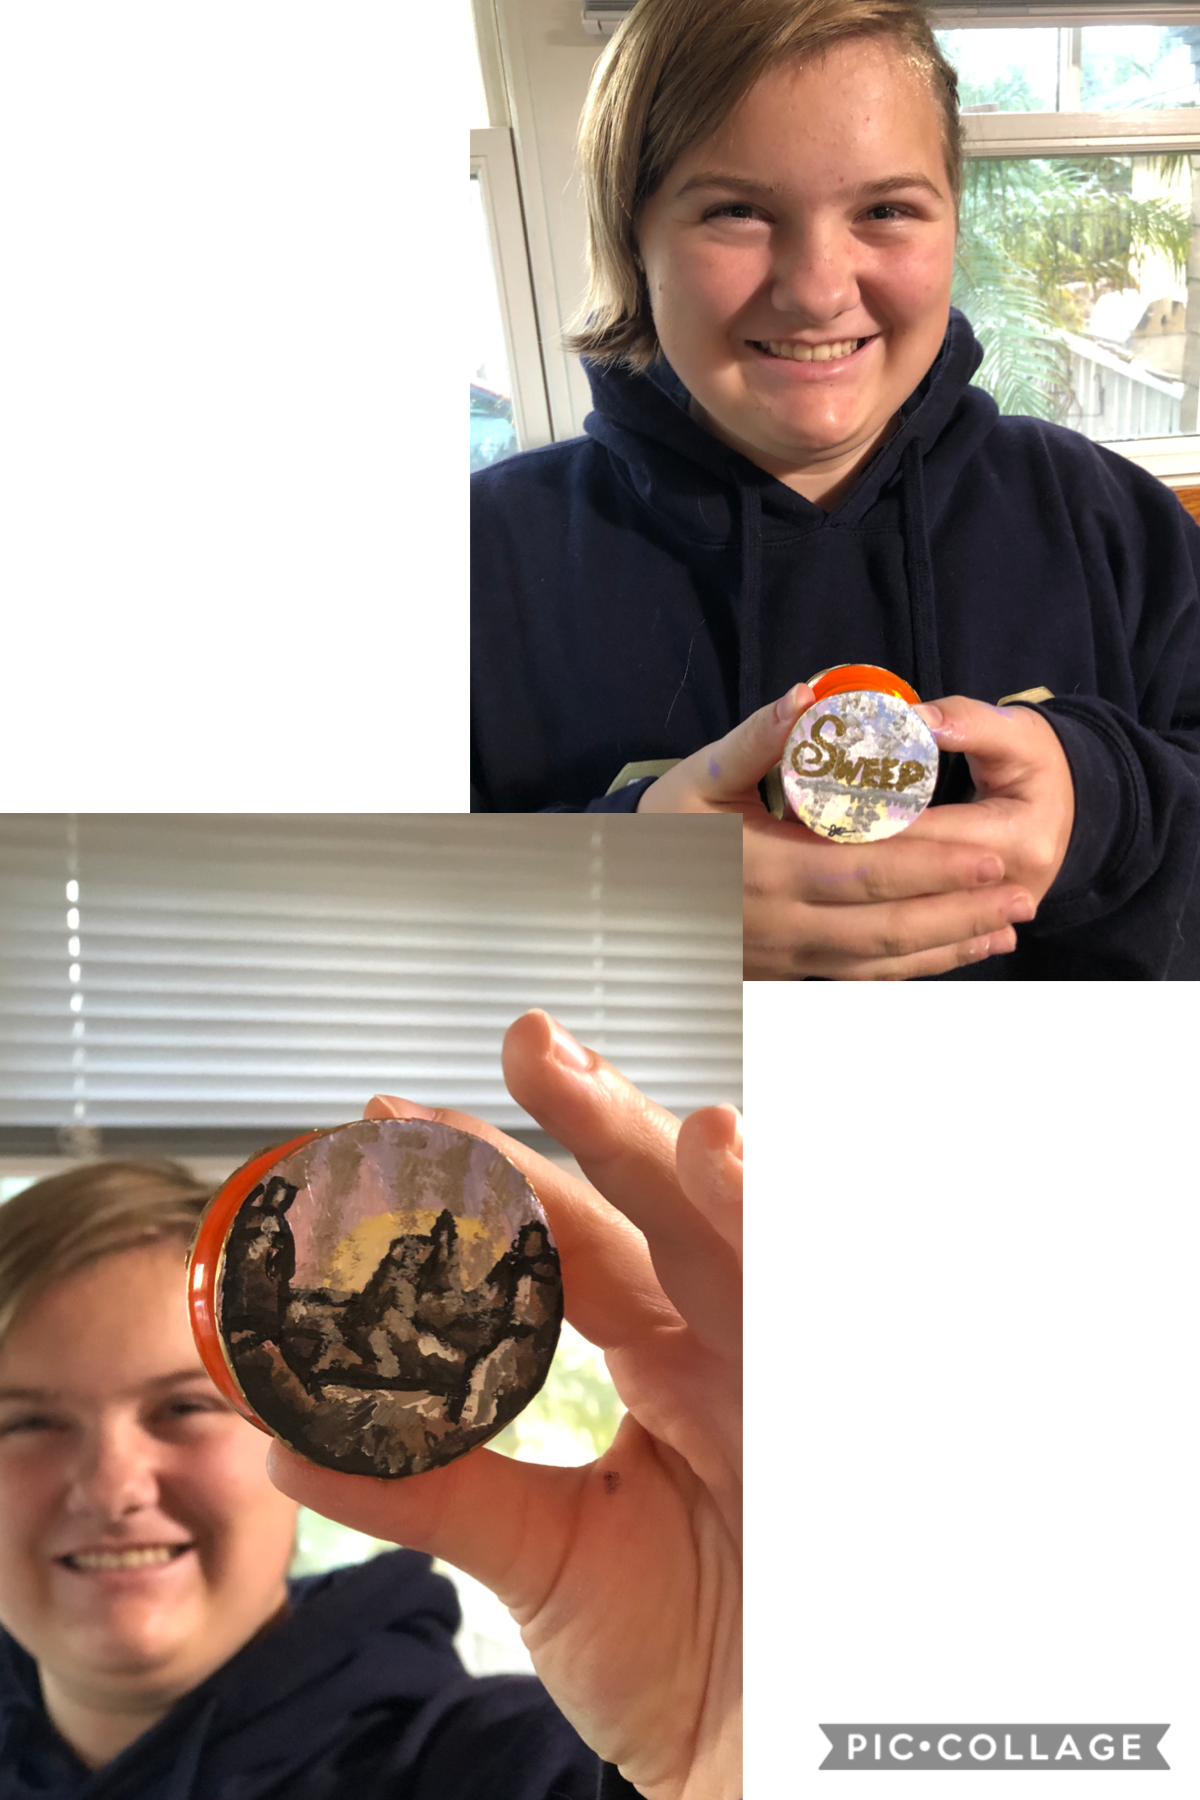 So Jonathan Auxier, the author I’d sweep came to my school today and I found out he likes yo-yos and so I made him one. With the help of some friends tho. It was so cool. He really liked it! 